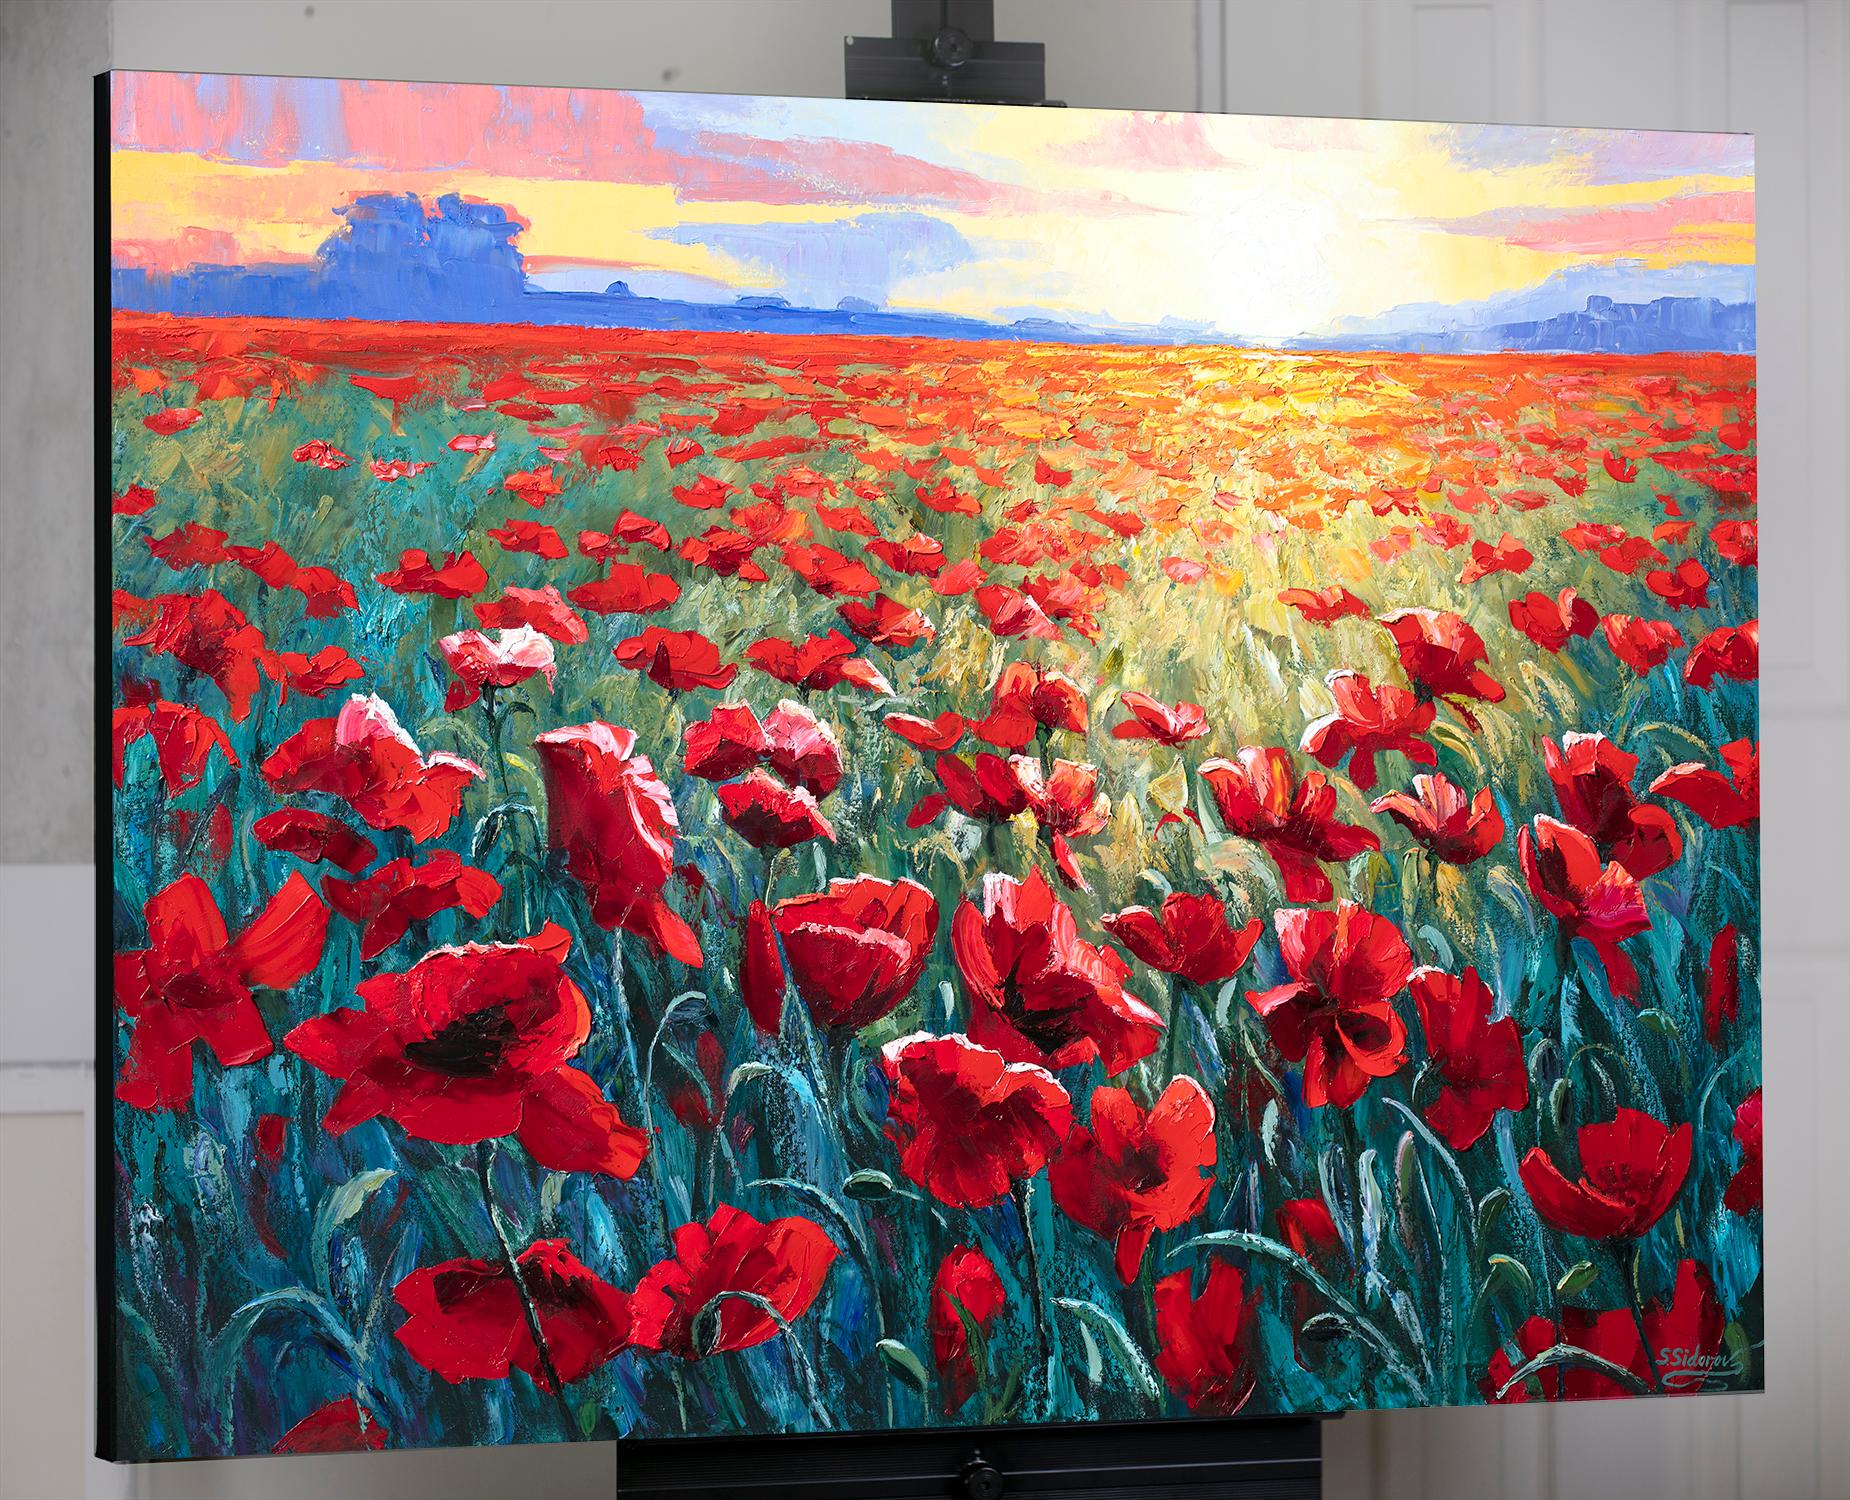 <p>Artist Comments<br>A field of red poppies basks in the remaining glow of the setting sun. The colorful sky echoes the vibrancy of the flowers. Painted with a palette knife, the composition captures nature's delicate texture and dramatic tones,